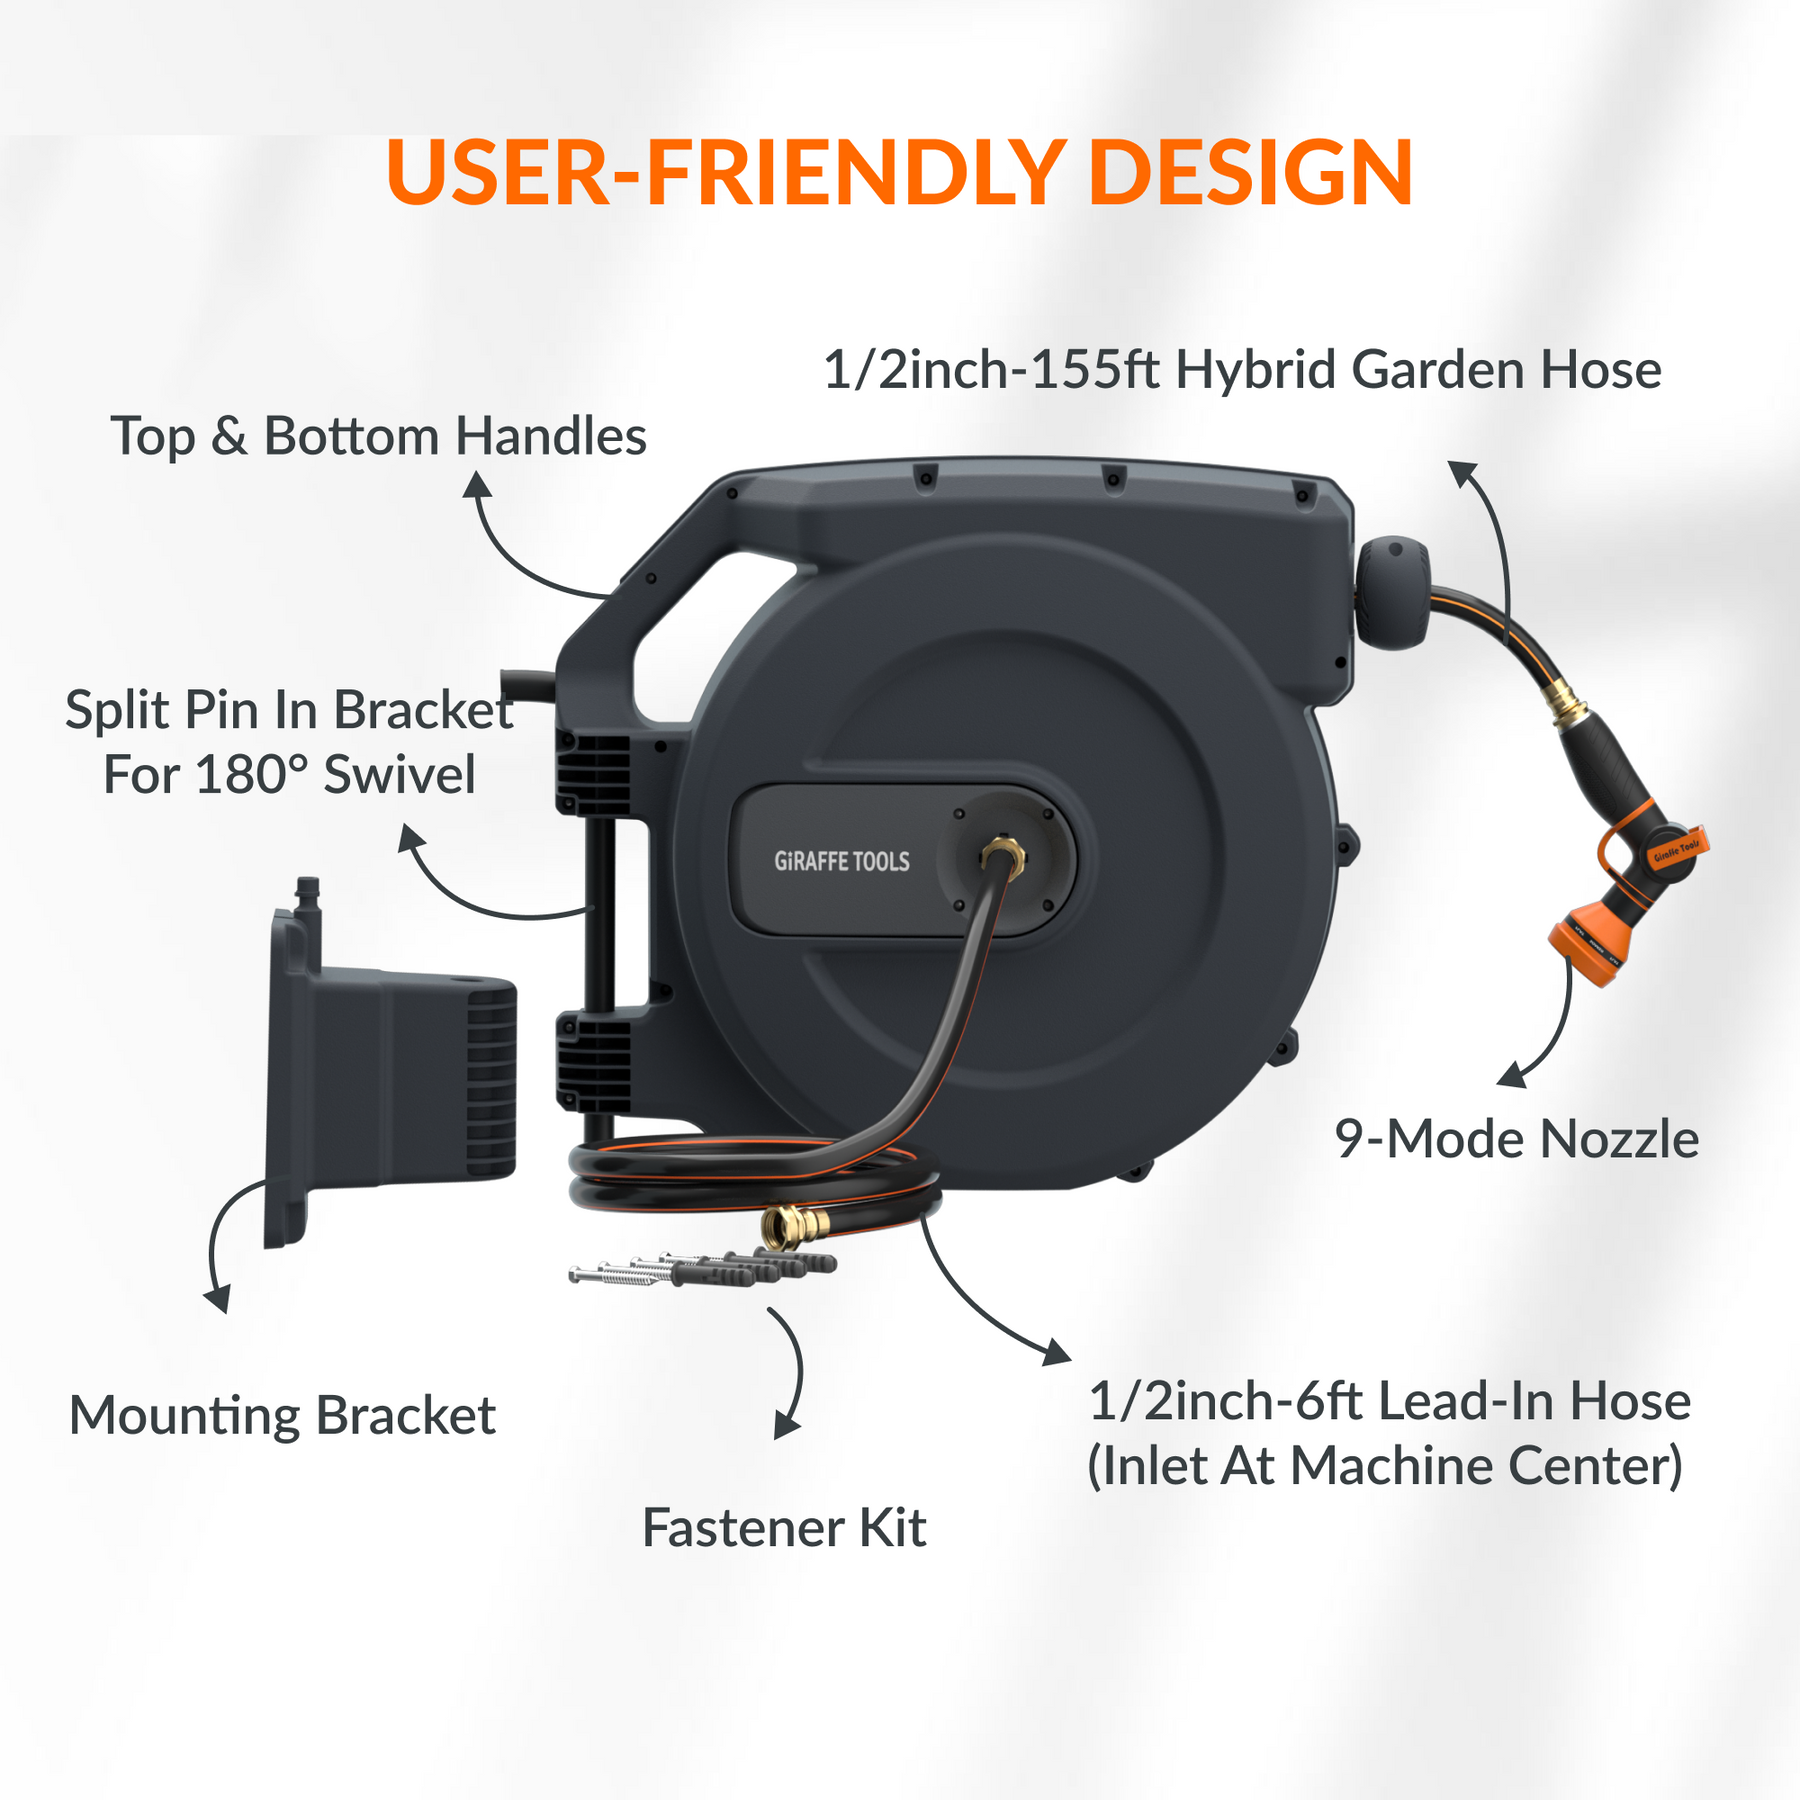 GLAHODEN Retractable Garden Hose Reel, 1/2in x 140ft+6ft Increase Flow Rate  By 20% Water Hose Reel, Patented Design for Any Length Lock Slow Return  System 2 Year Anti-fading Hose Reel Wall Mount